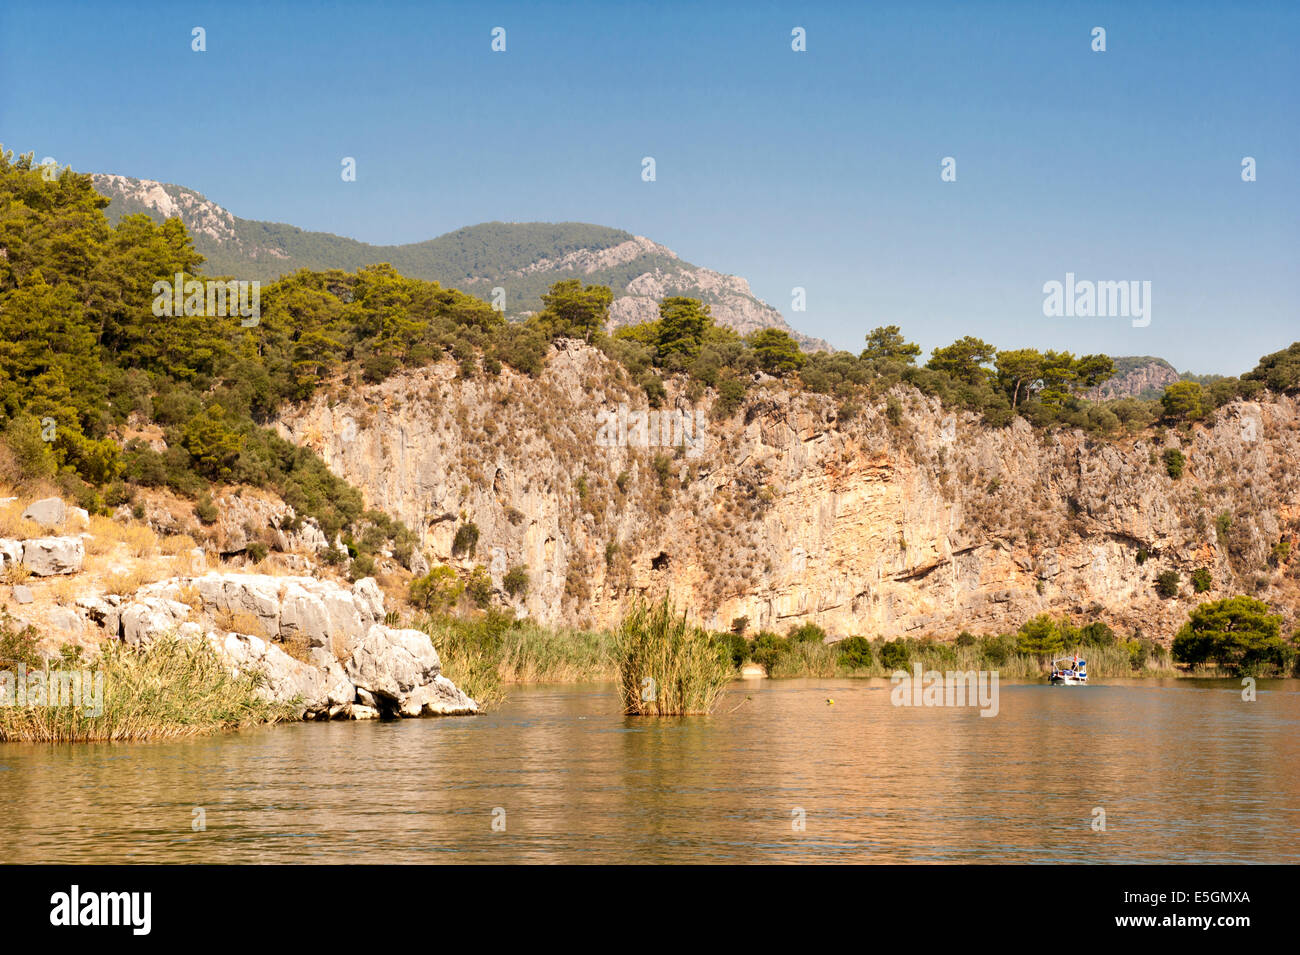 Boating is a popular pastime on the Dalyan river in Mugla province, Turkey Stock Photo